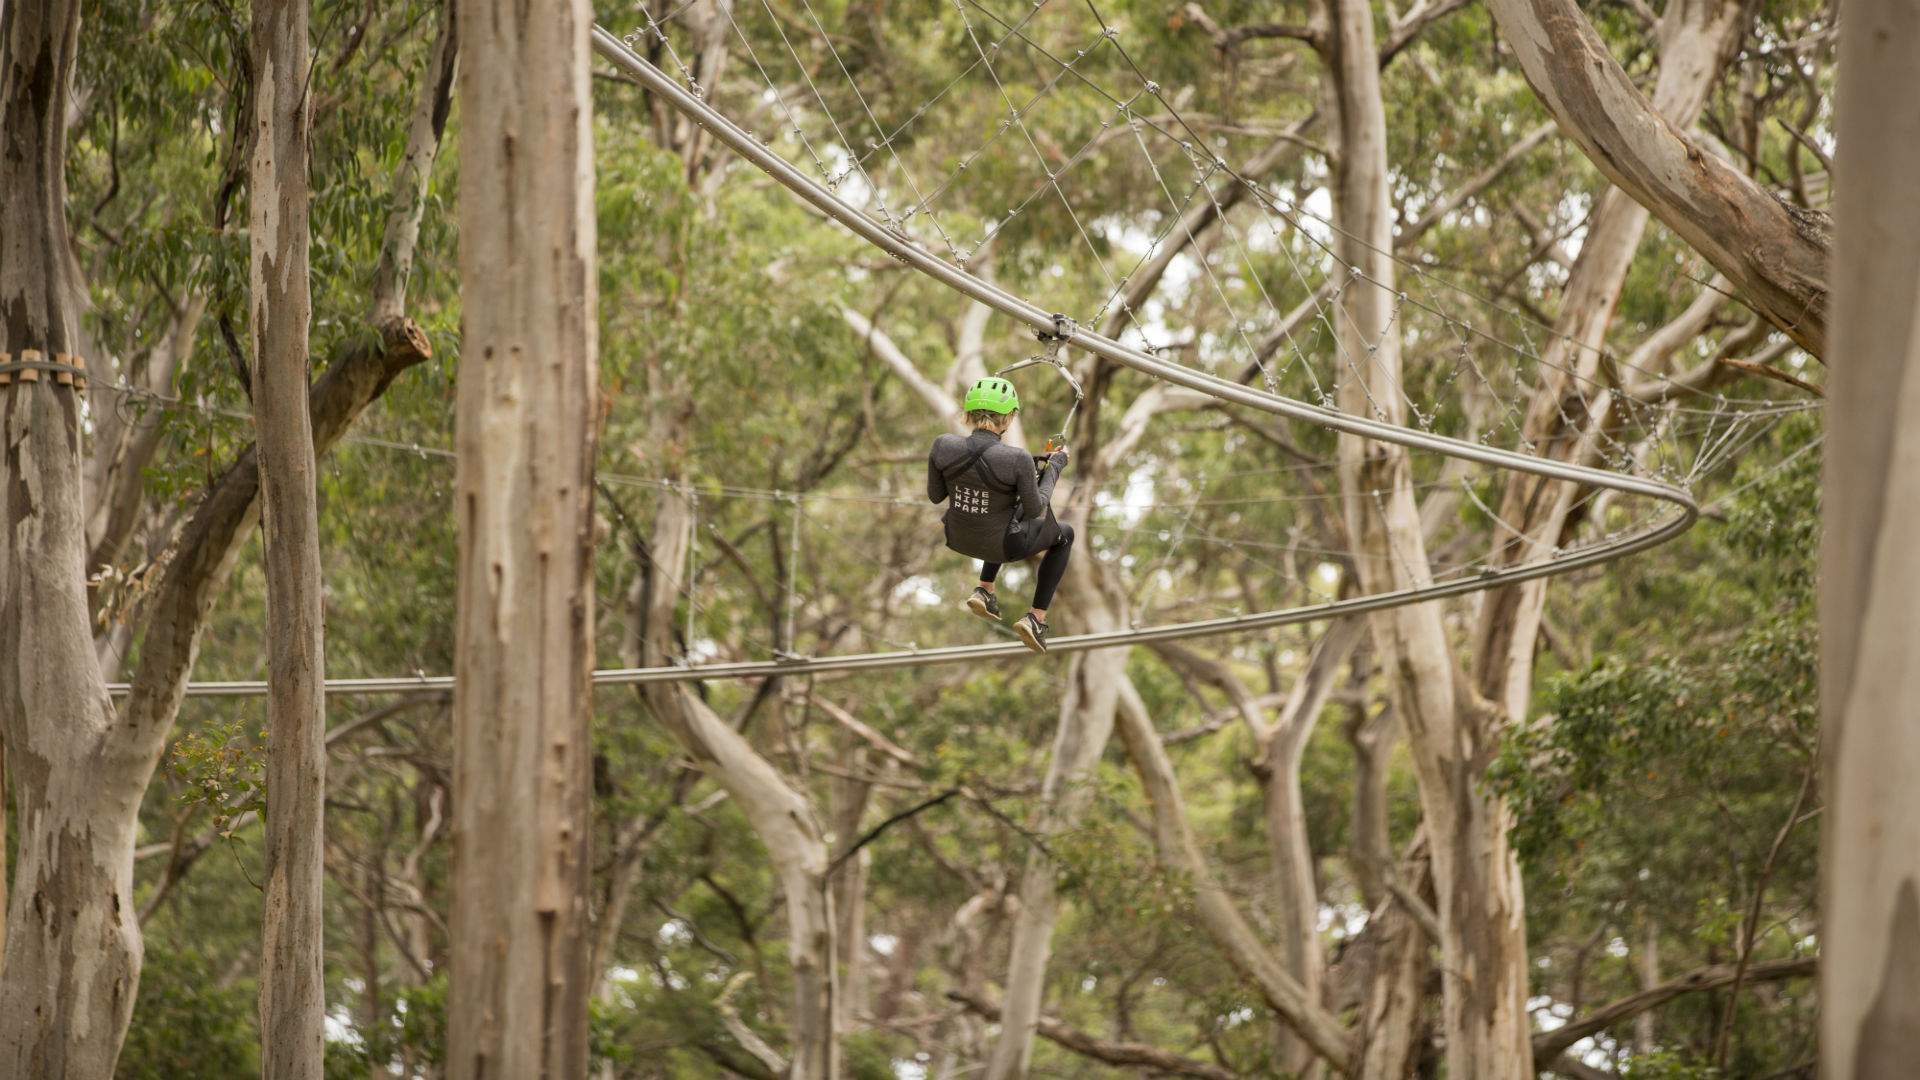 Victoria Has Just Scored an Epic New Off-the-Grid Aerial Adventure Park